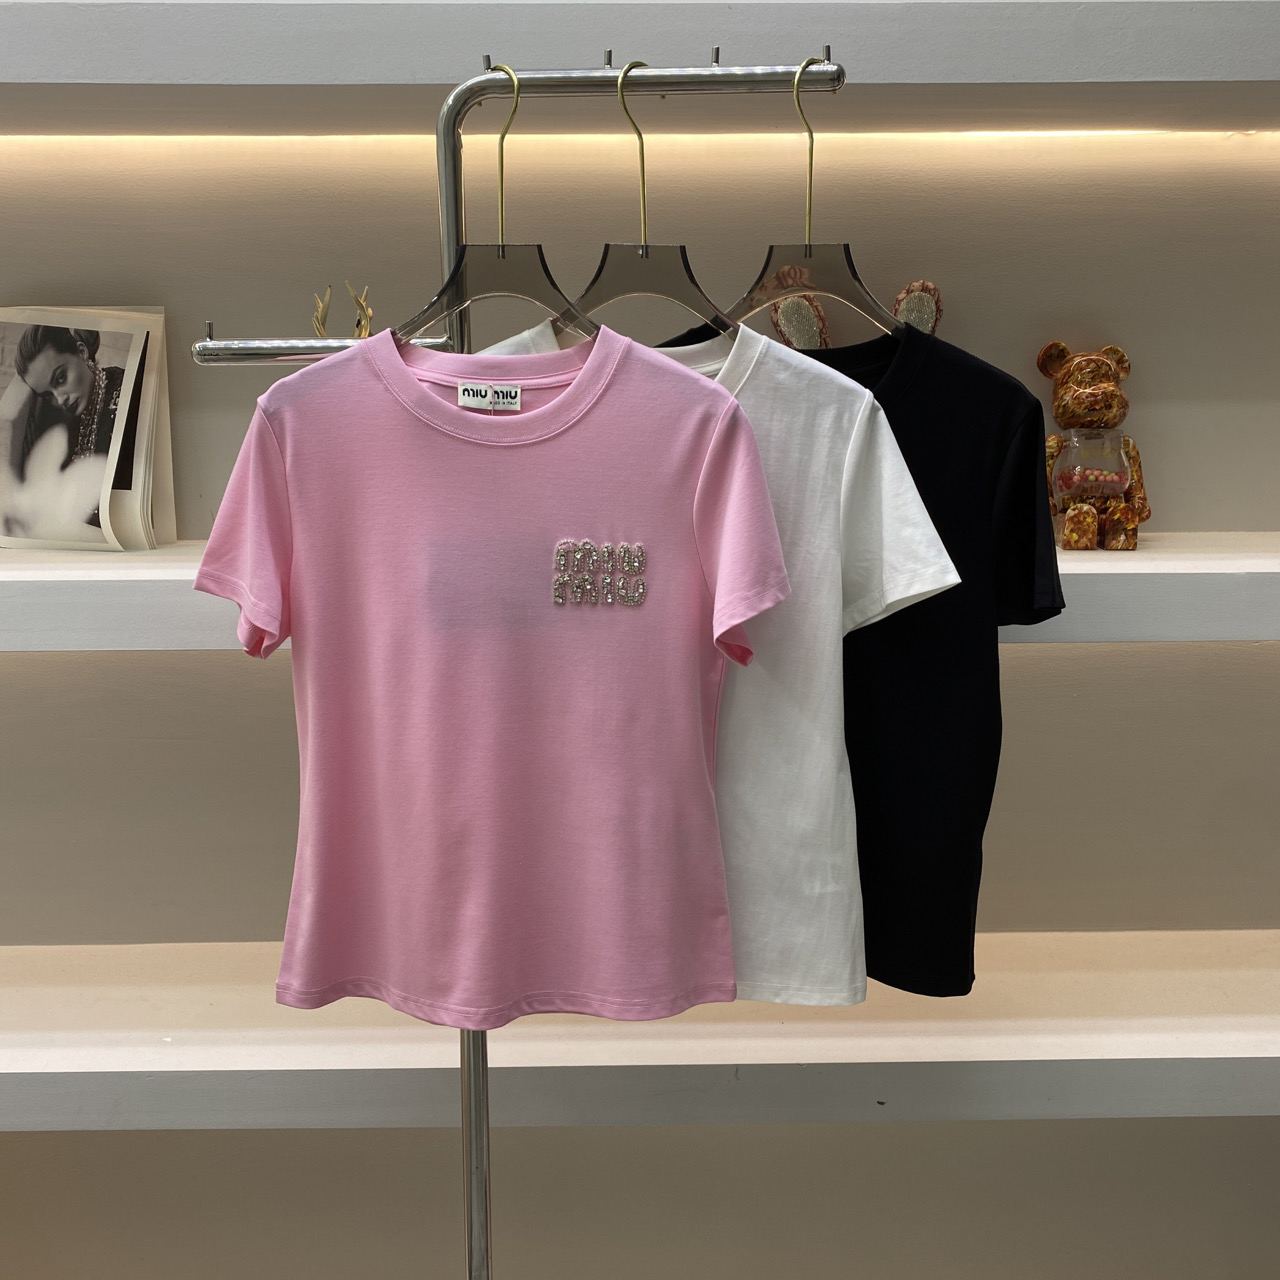 MiuMiu Clothing T-Shirt Cotton Stretch Spring/Summer Collection